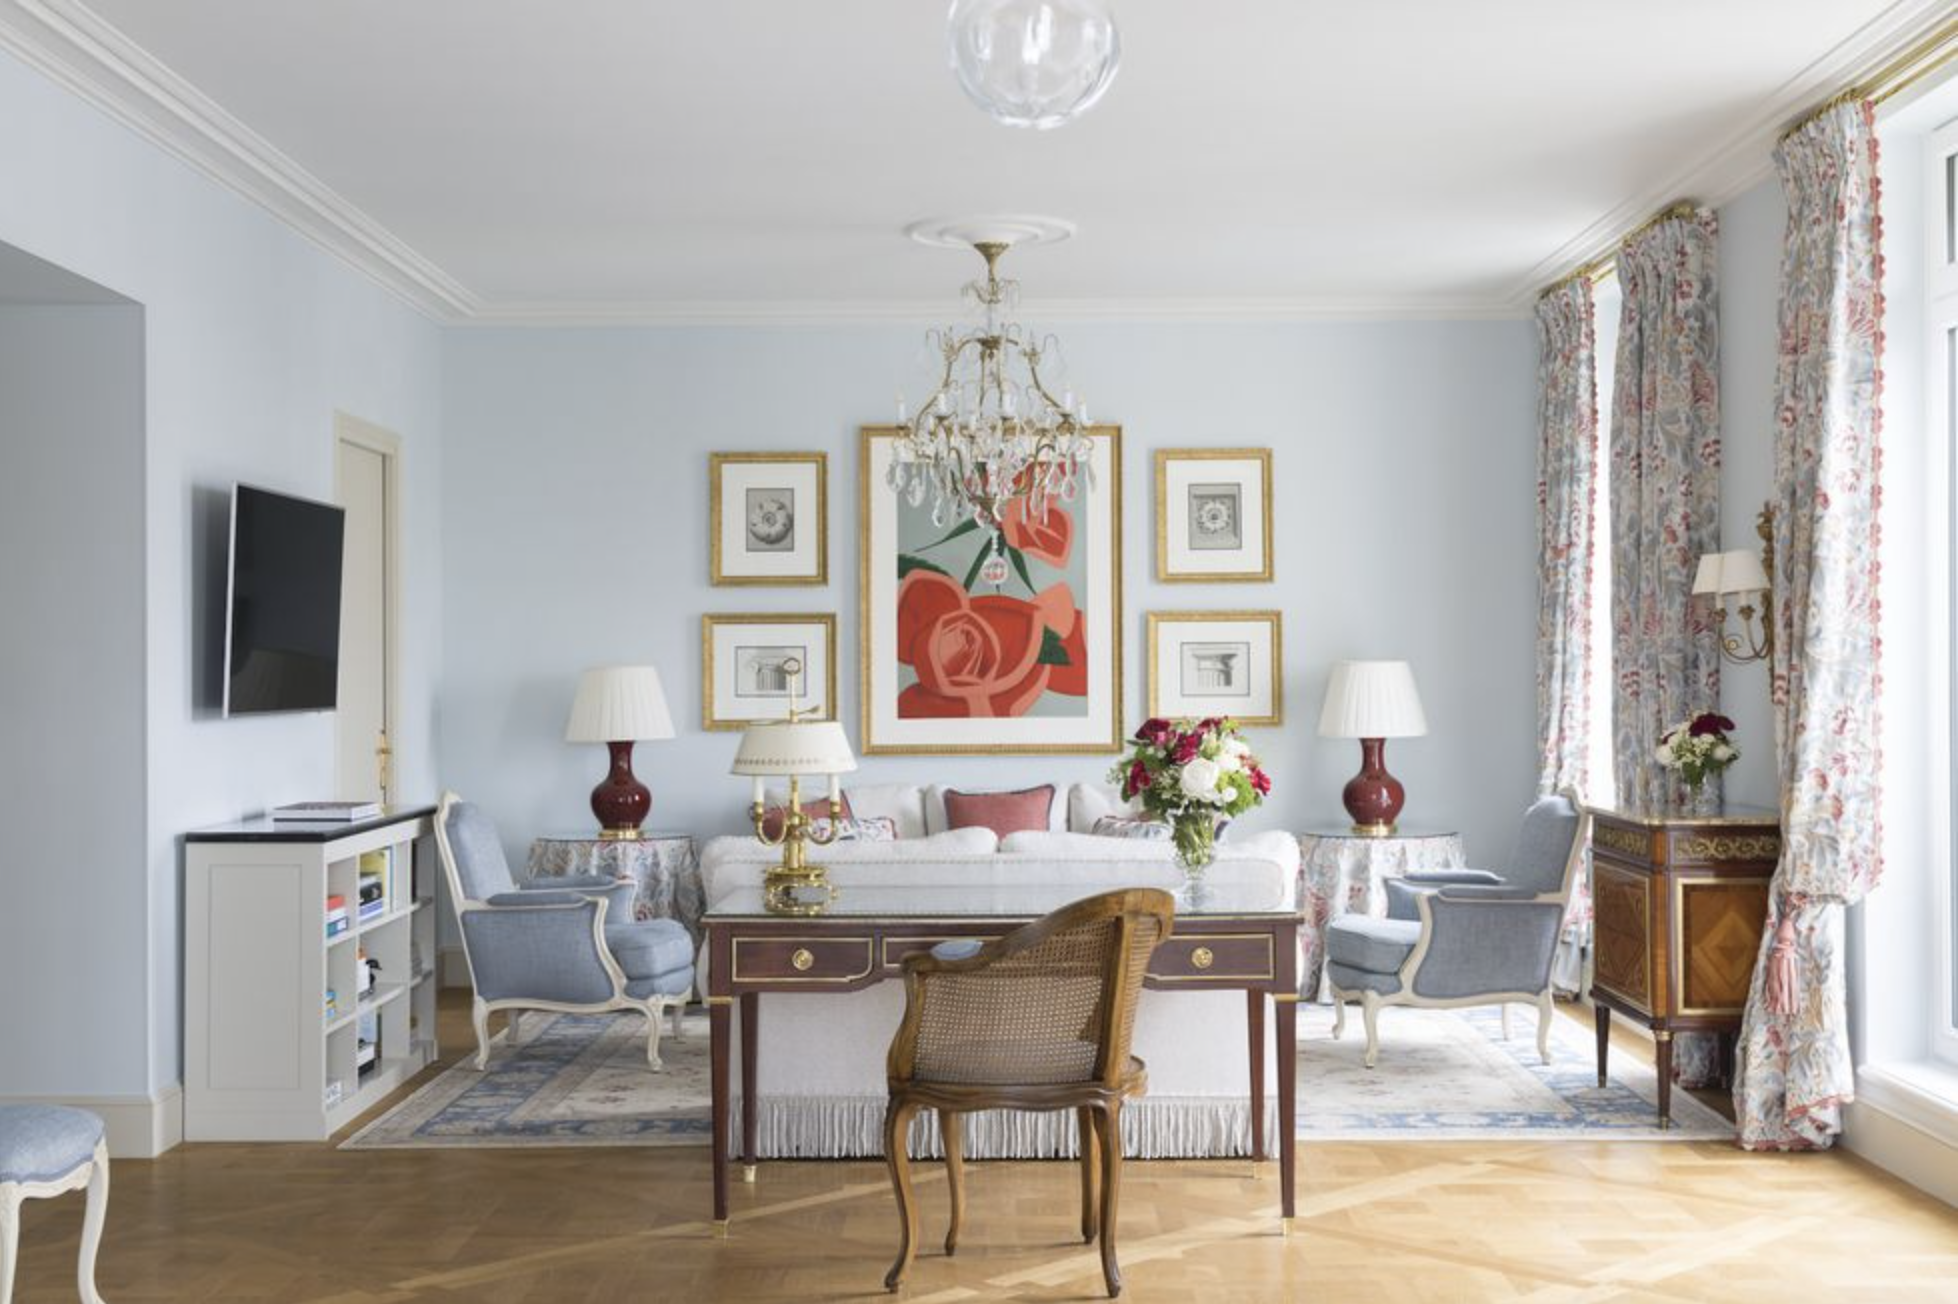 A chic blue guest suite at Le Bristol Paris with an antique wooden writing desk and abstract coral floral art on the gallery wall